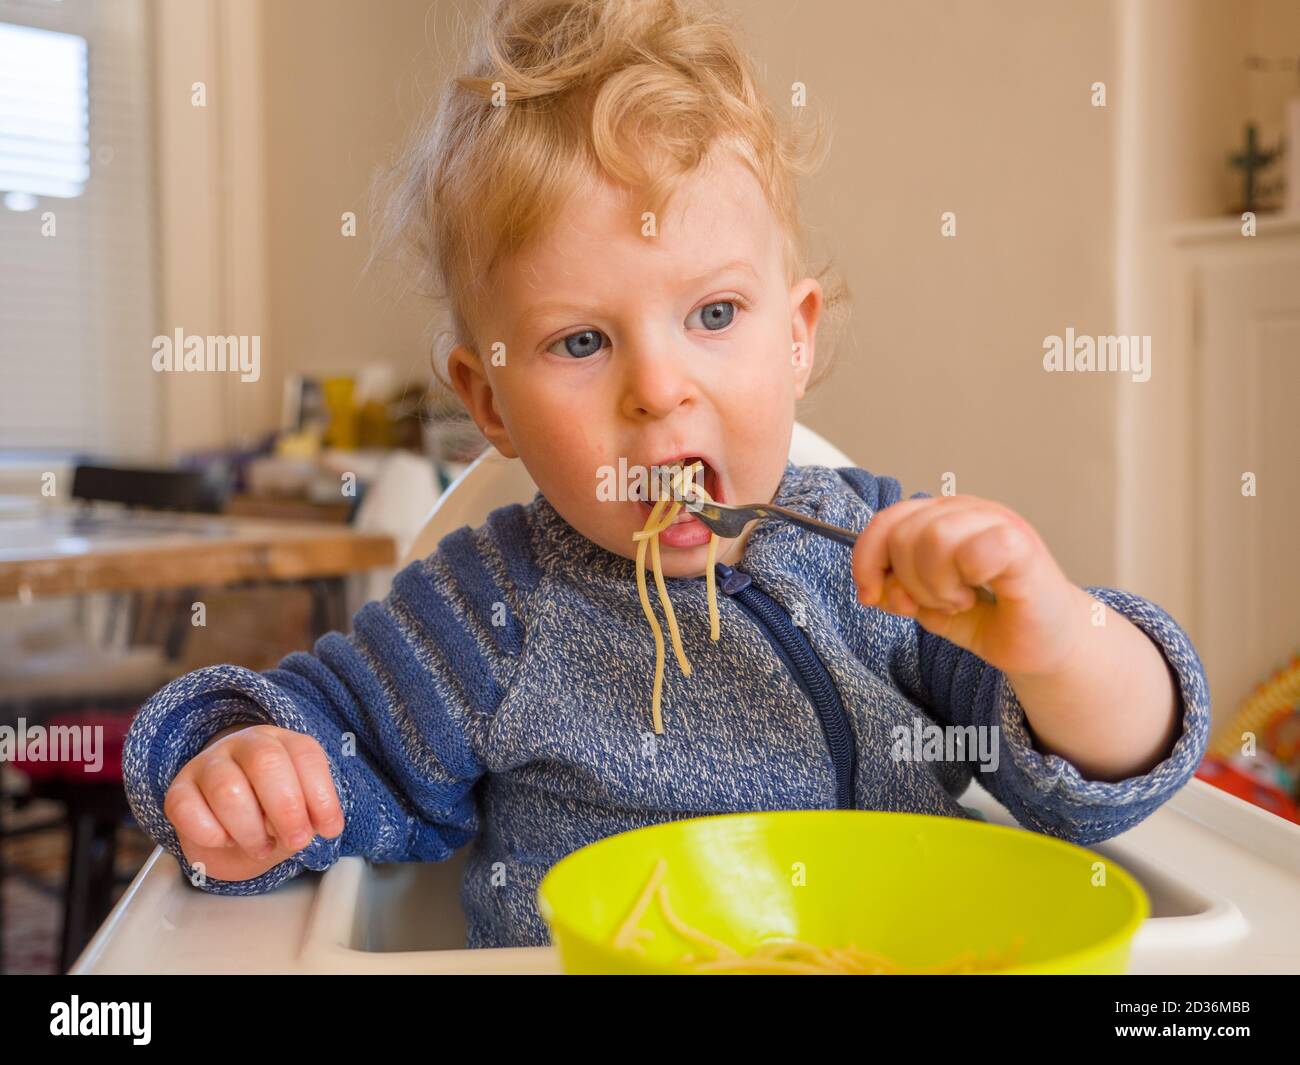 One year old baby boy eating spaghetti with cutlery at home Stock Photo